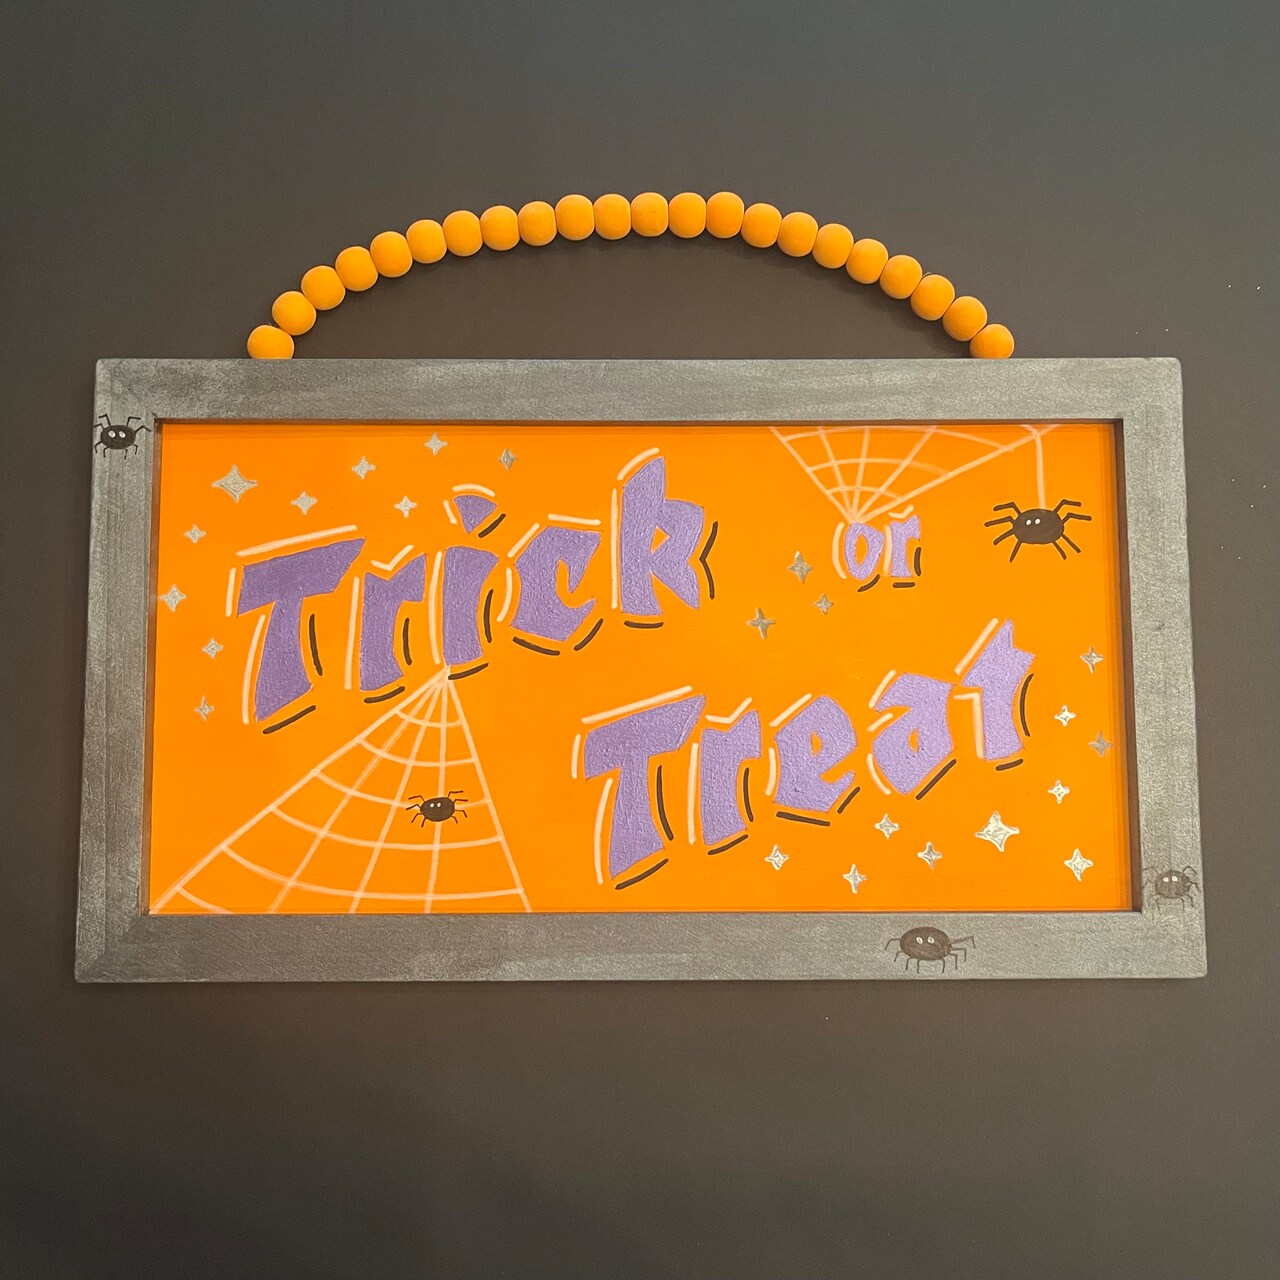 Crafting Basics: Acrylic Painted Trick-or-Treat Sign with @ProbablySketch